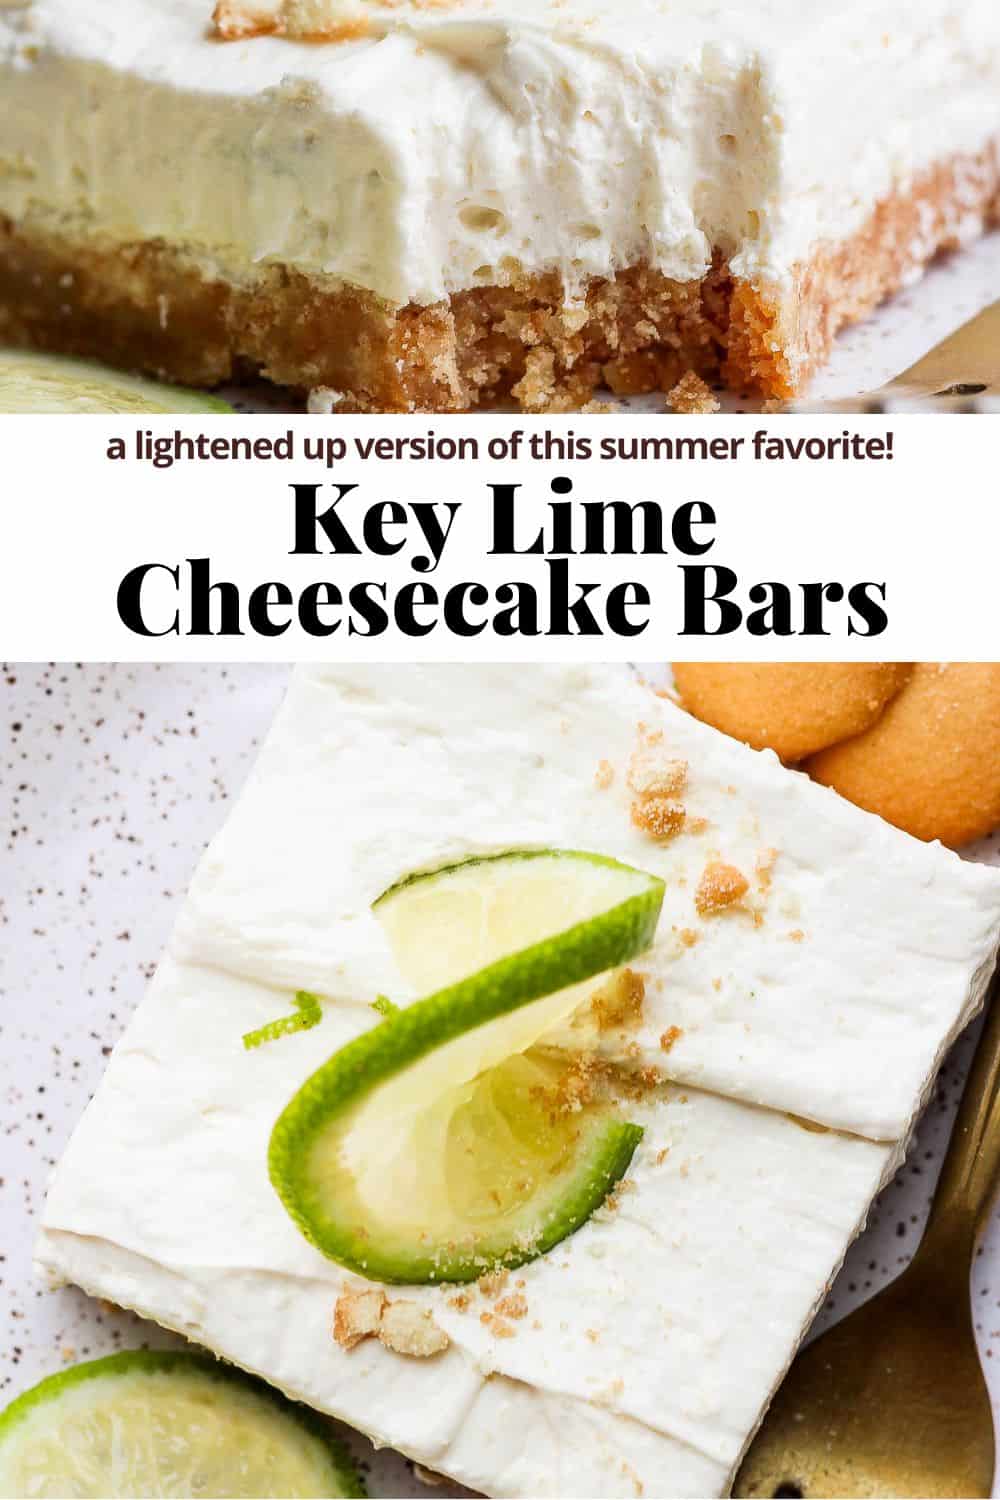 Pinterest image showing a piece of key lime cheesecake on a plate.